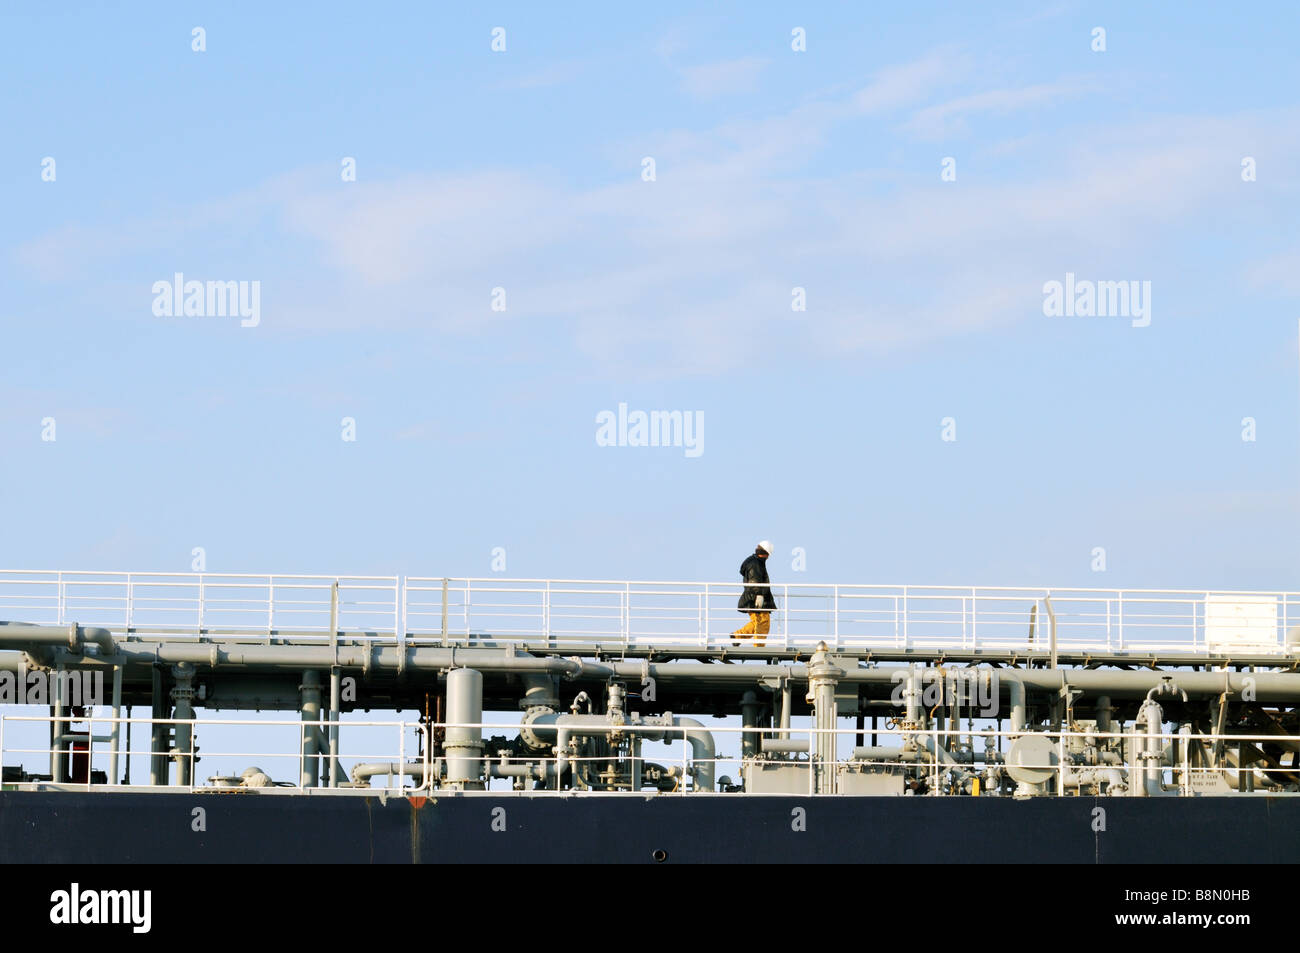 One man worker  walking across an industrial walkway with rails with pipes below. Stock Photo